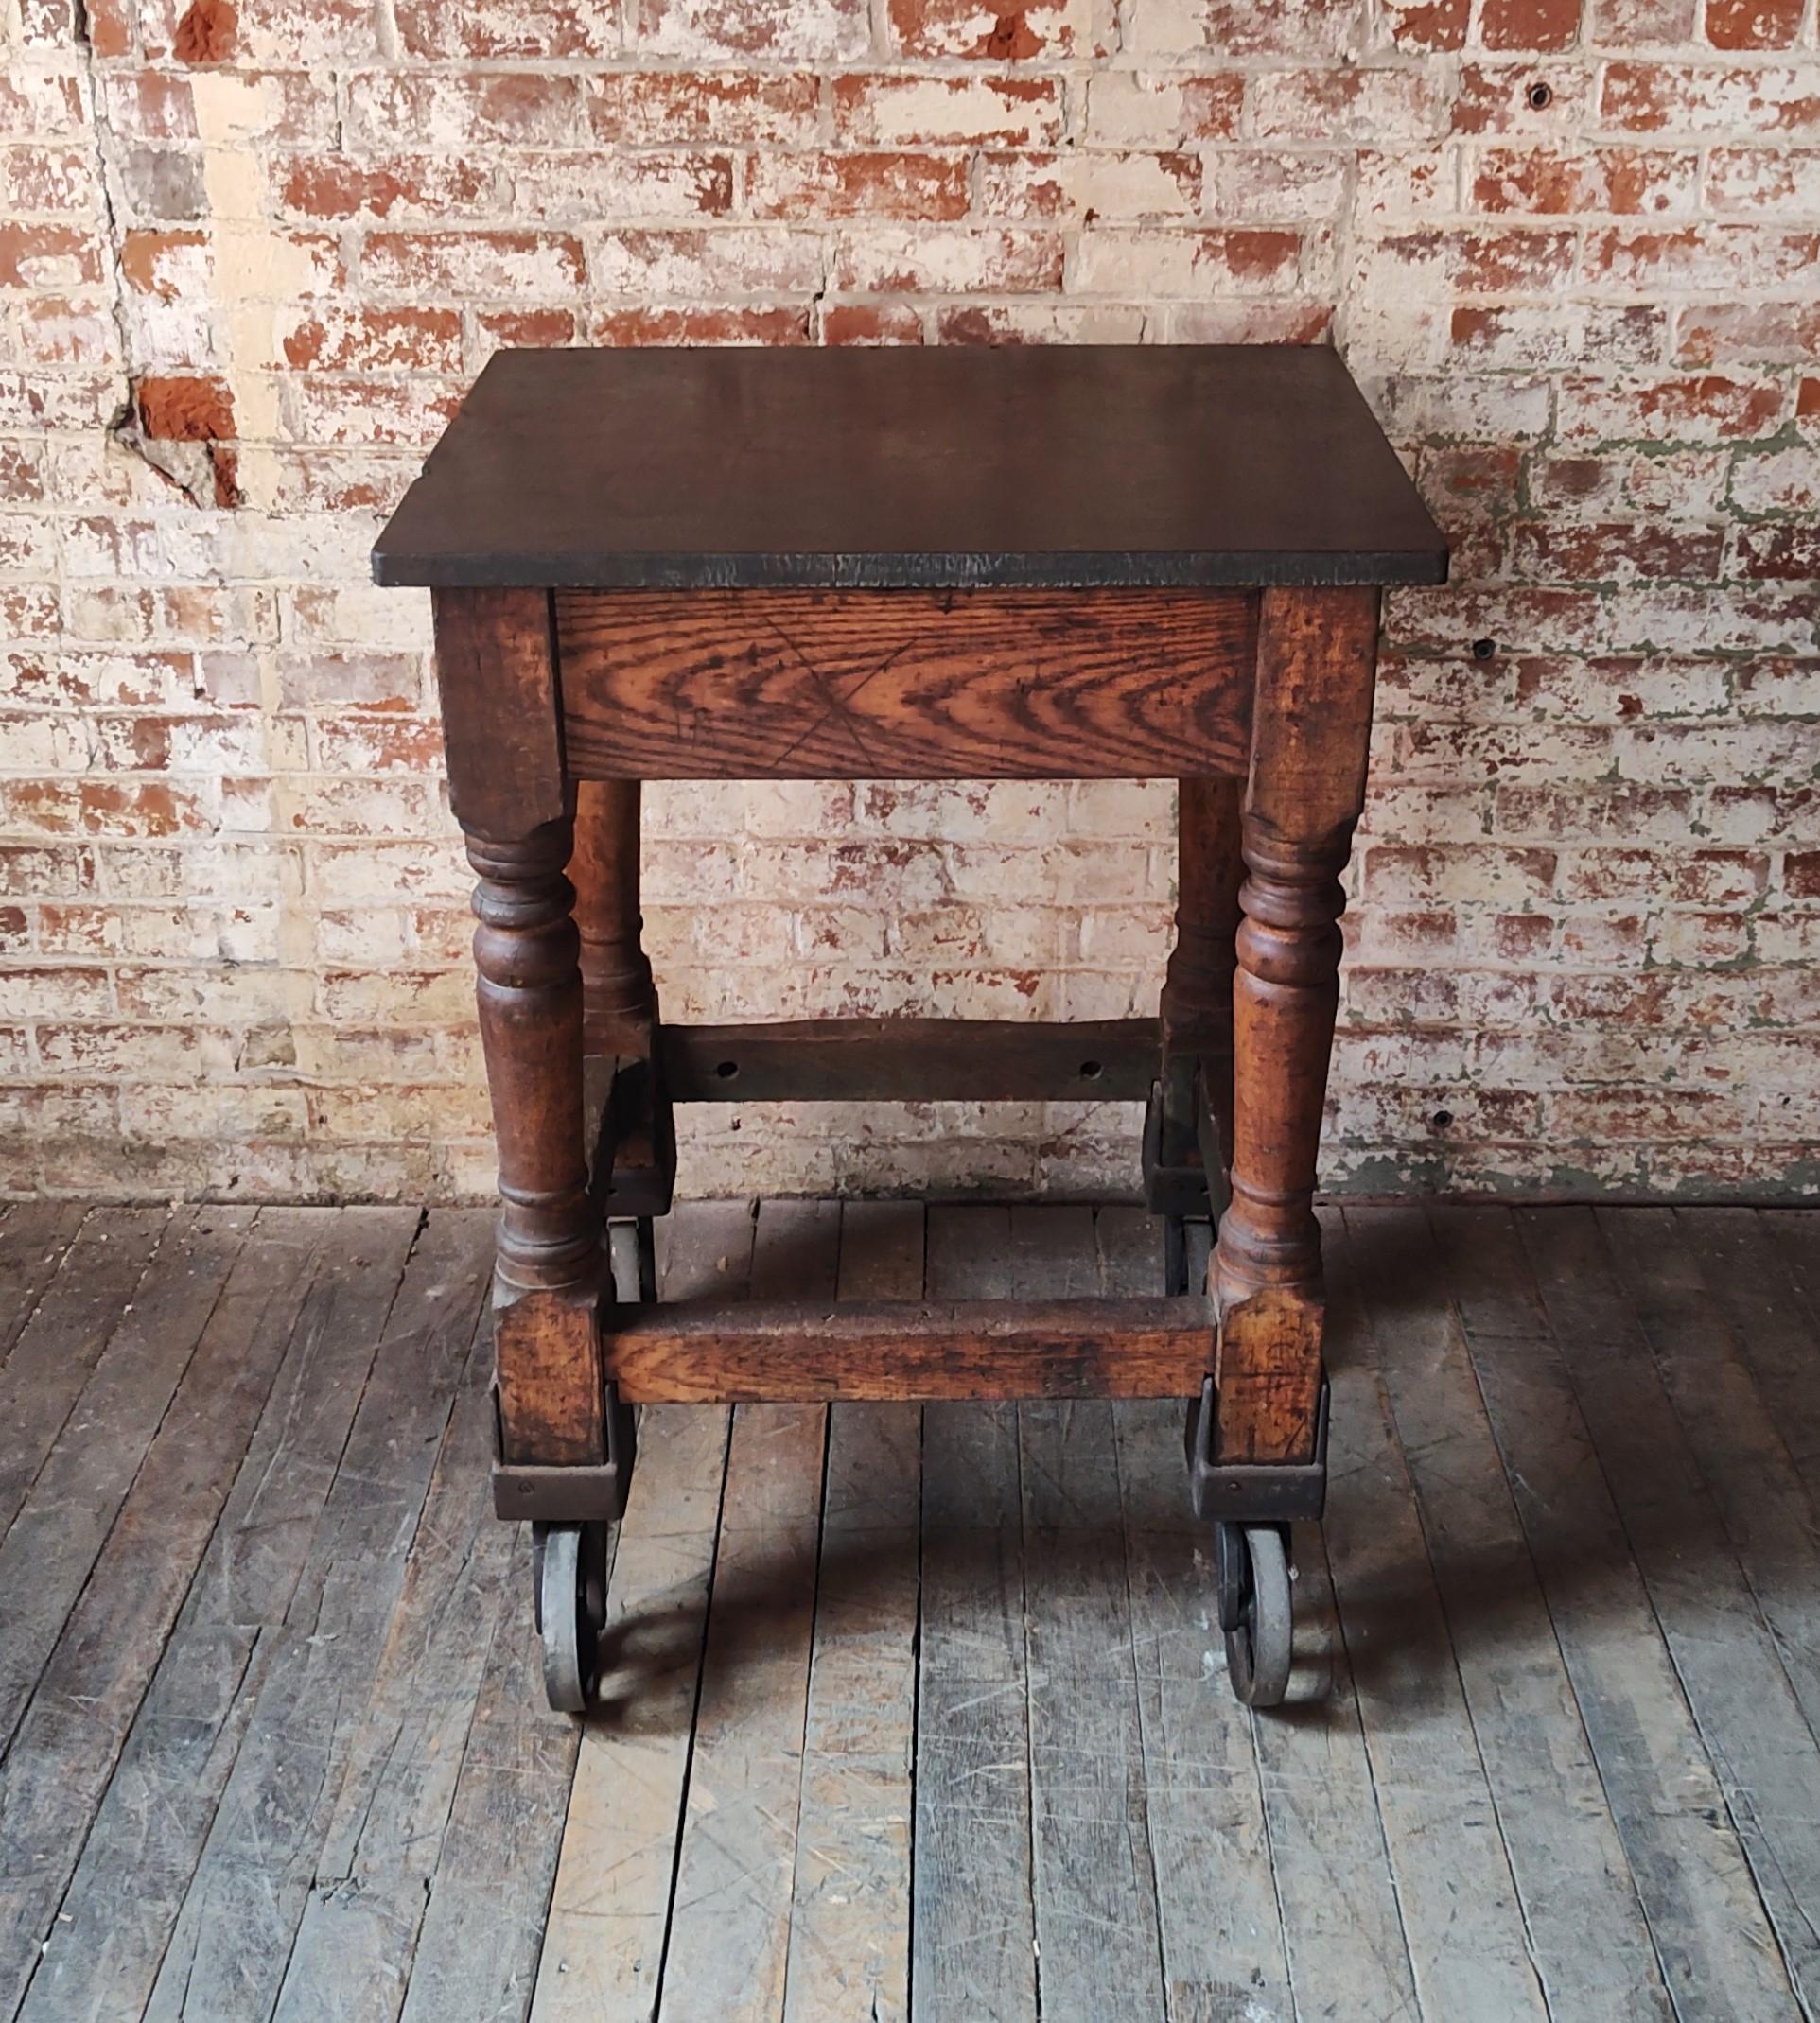 Antique Printer's Turtle Table

Overall Dimensions: 22 1/2